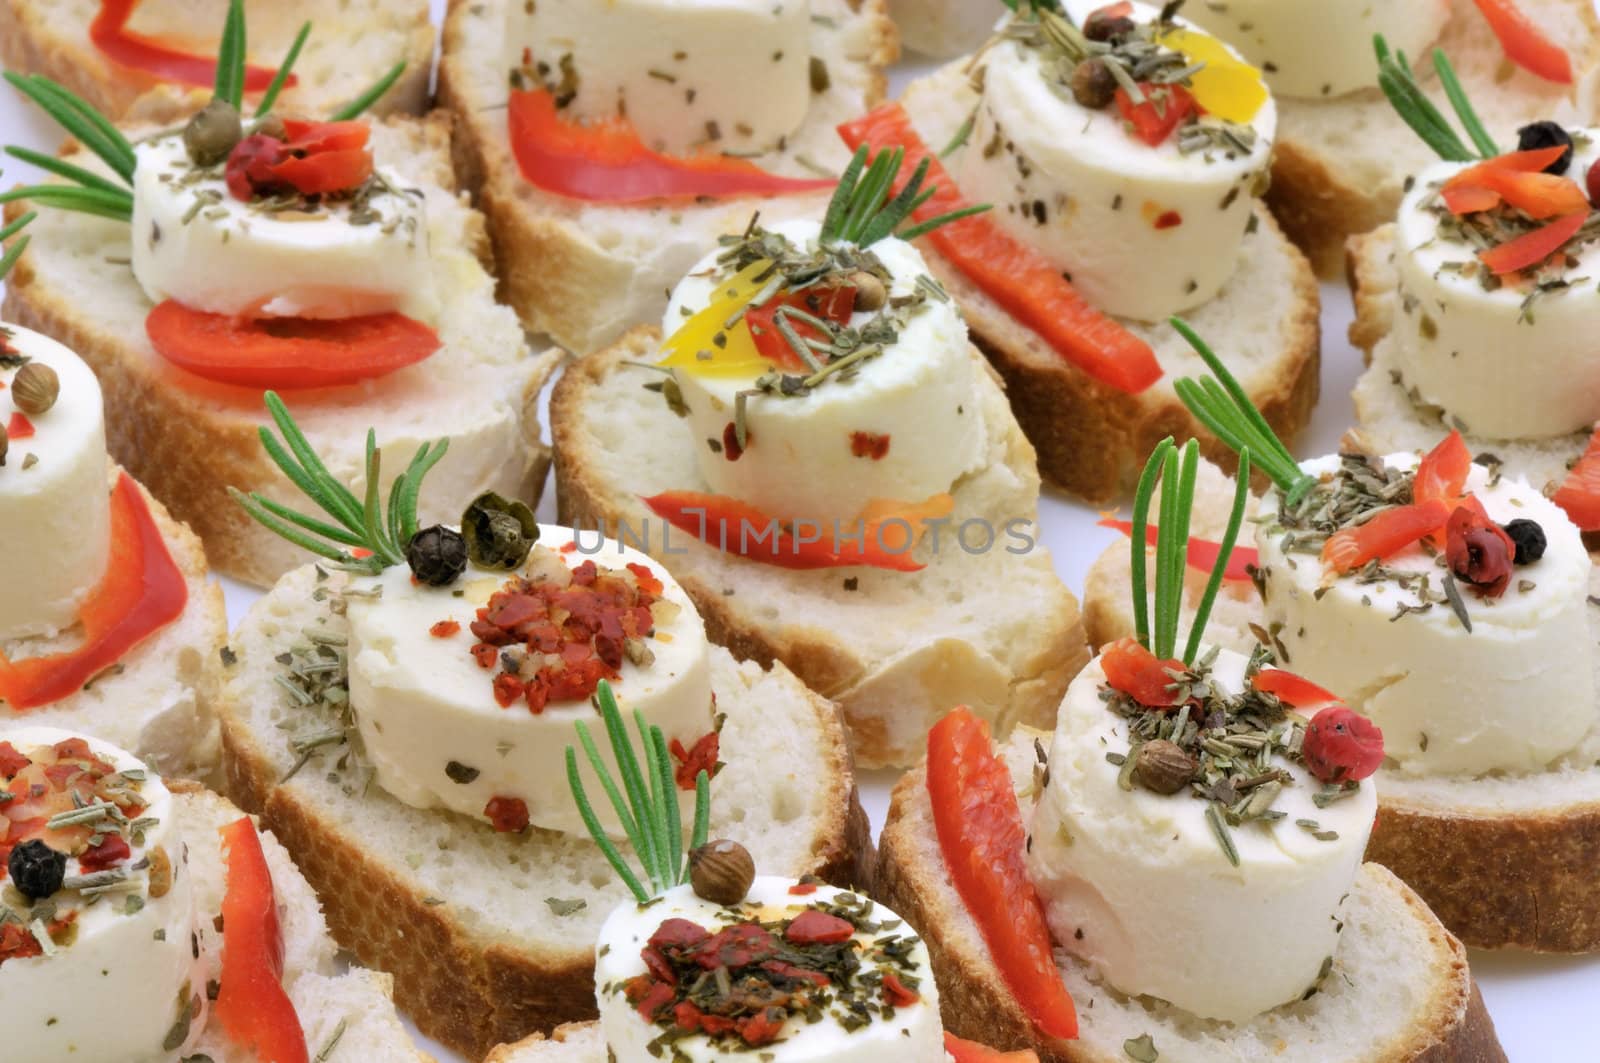 Small party cheese canapes with mediterranean flavours: fresh rosemary, mixed herbs and whole pepper